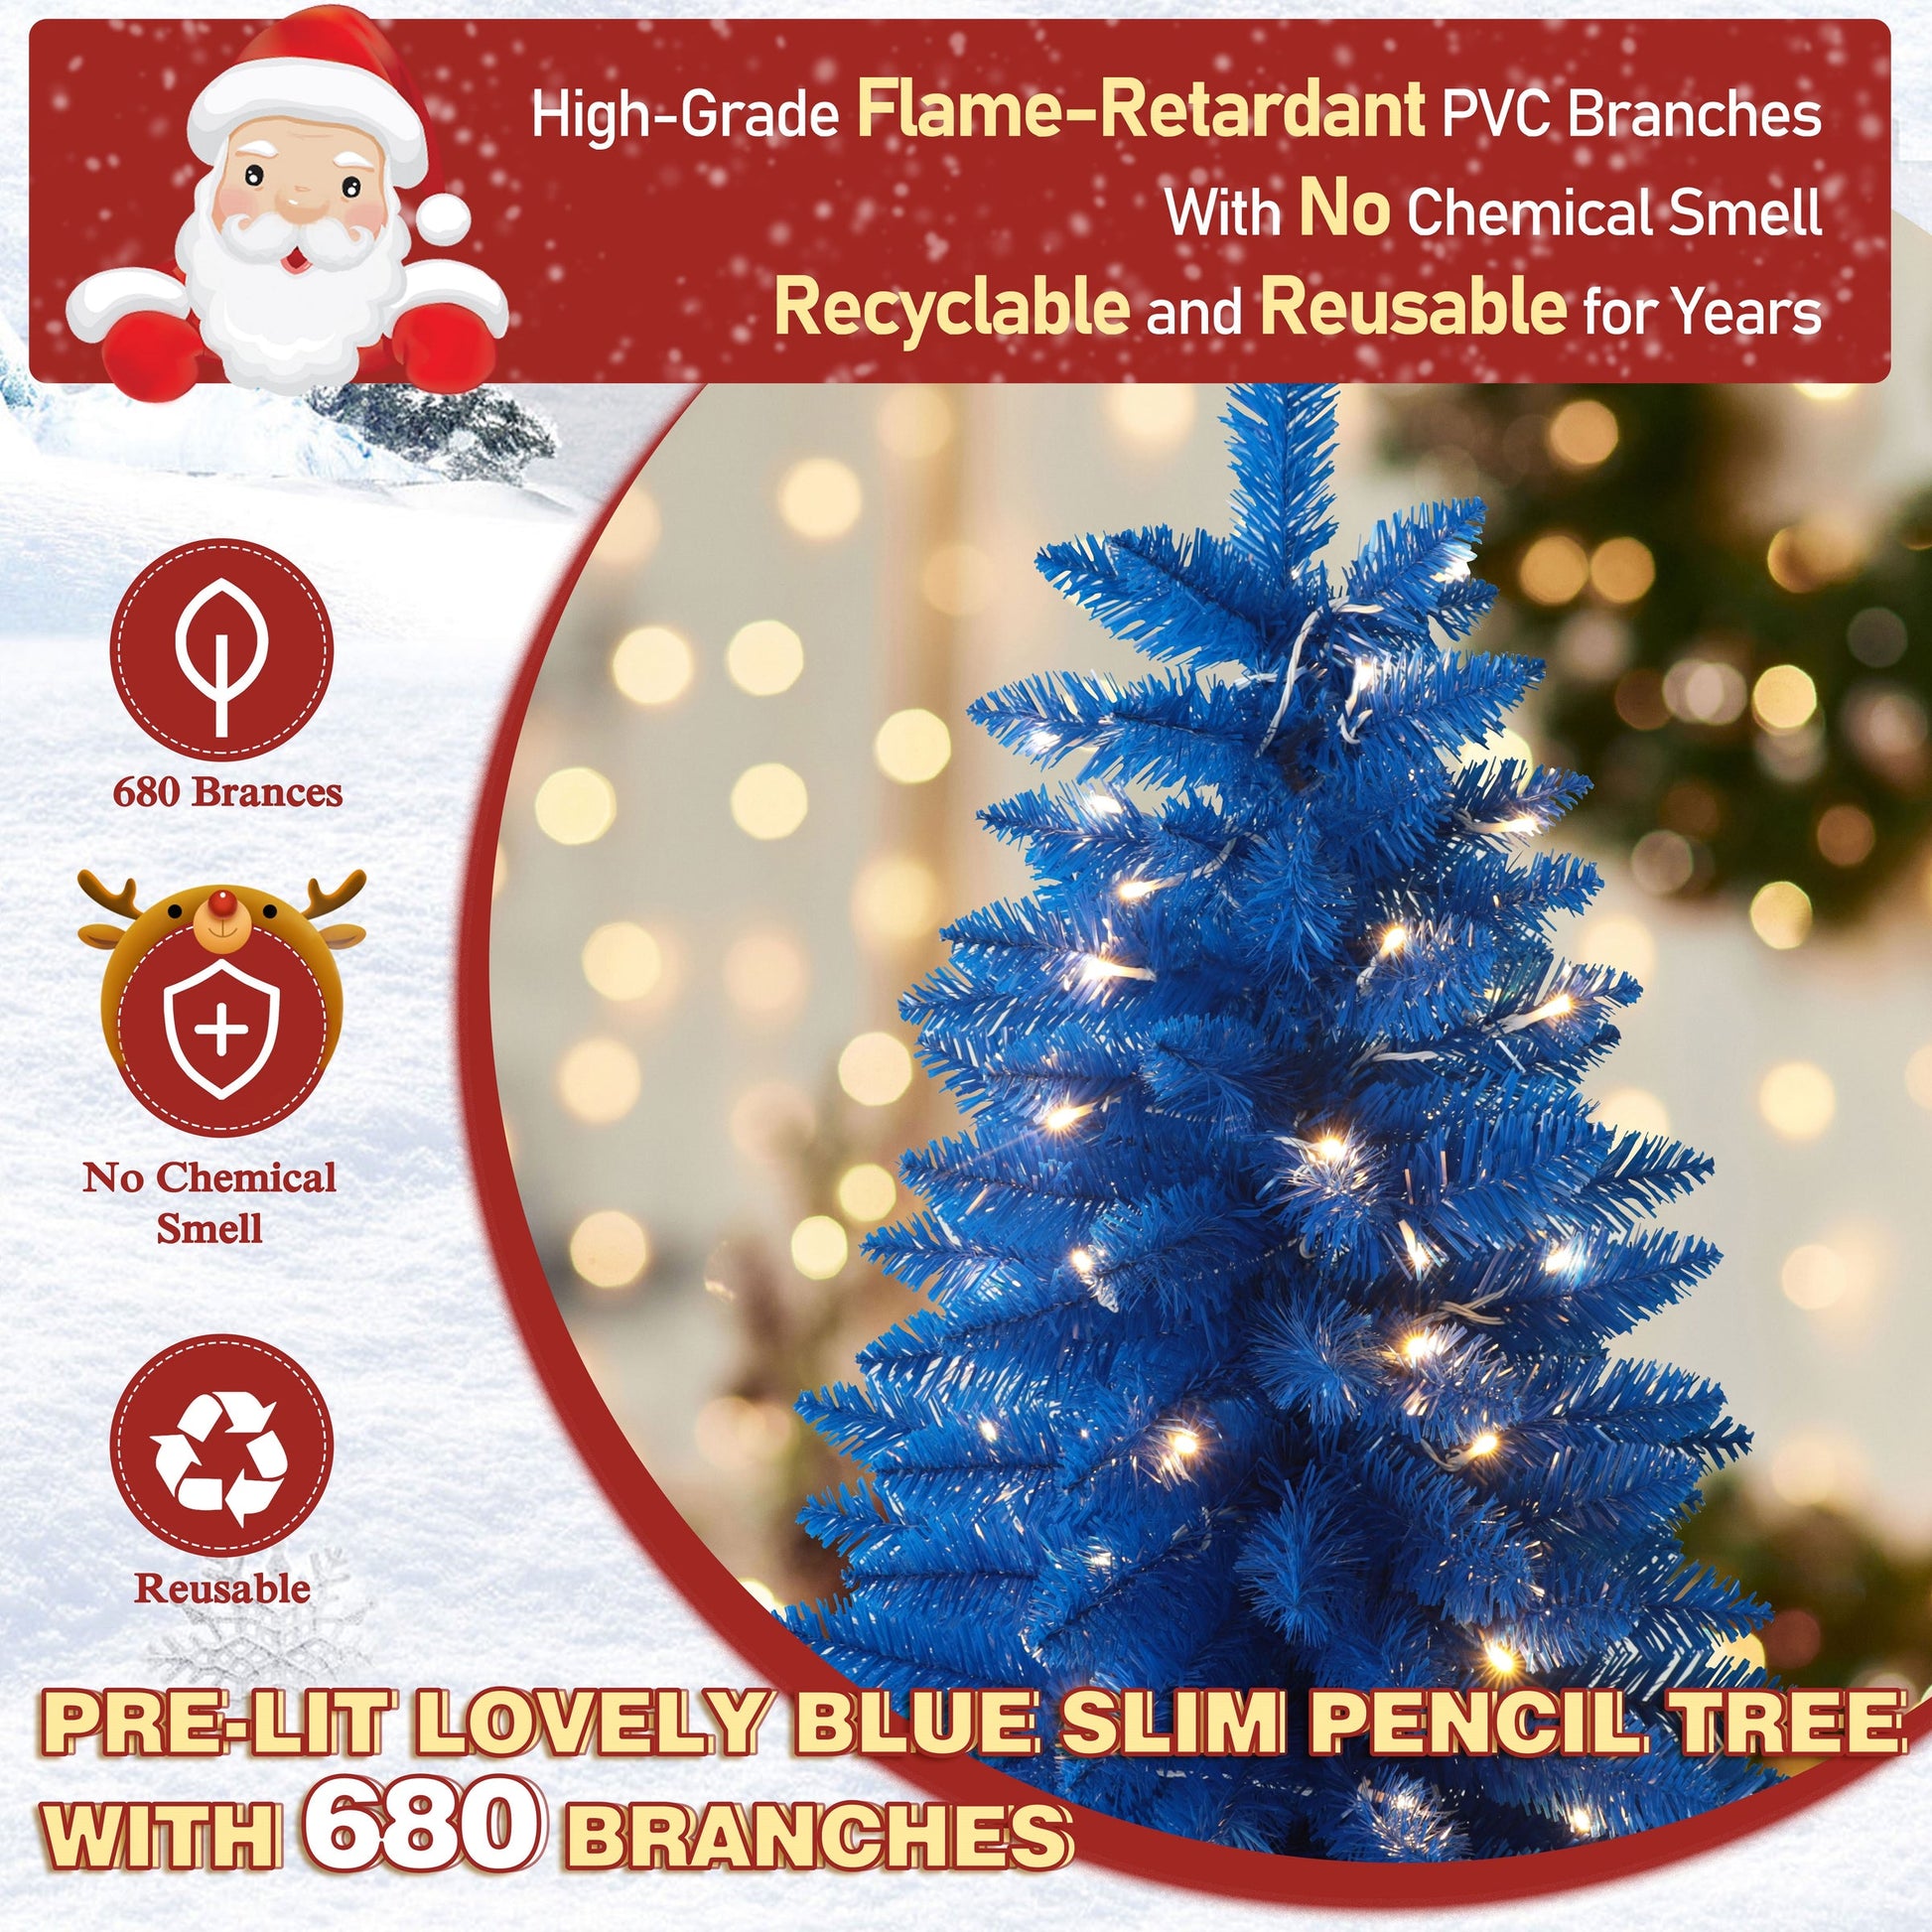 6ft BLUE Pre-lit Slim Pencil Artificial Christmas Tree with Lights.